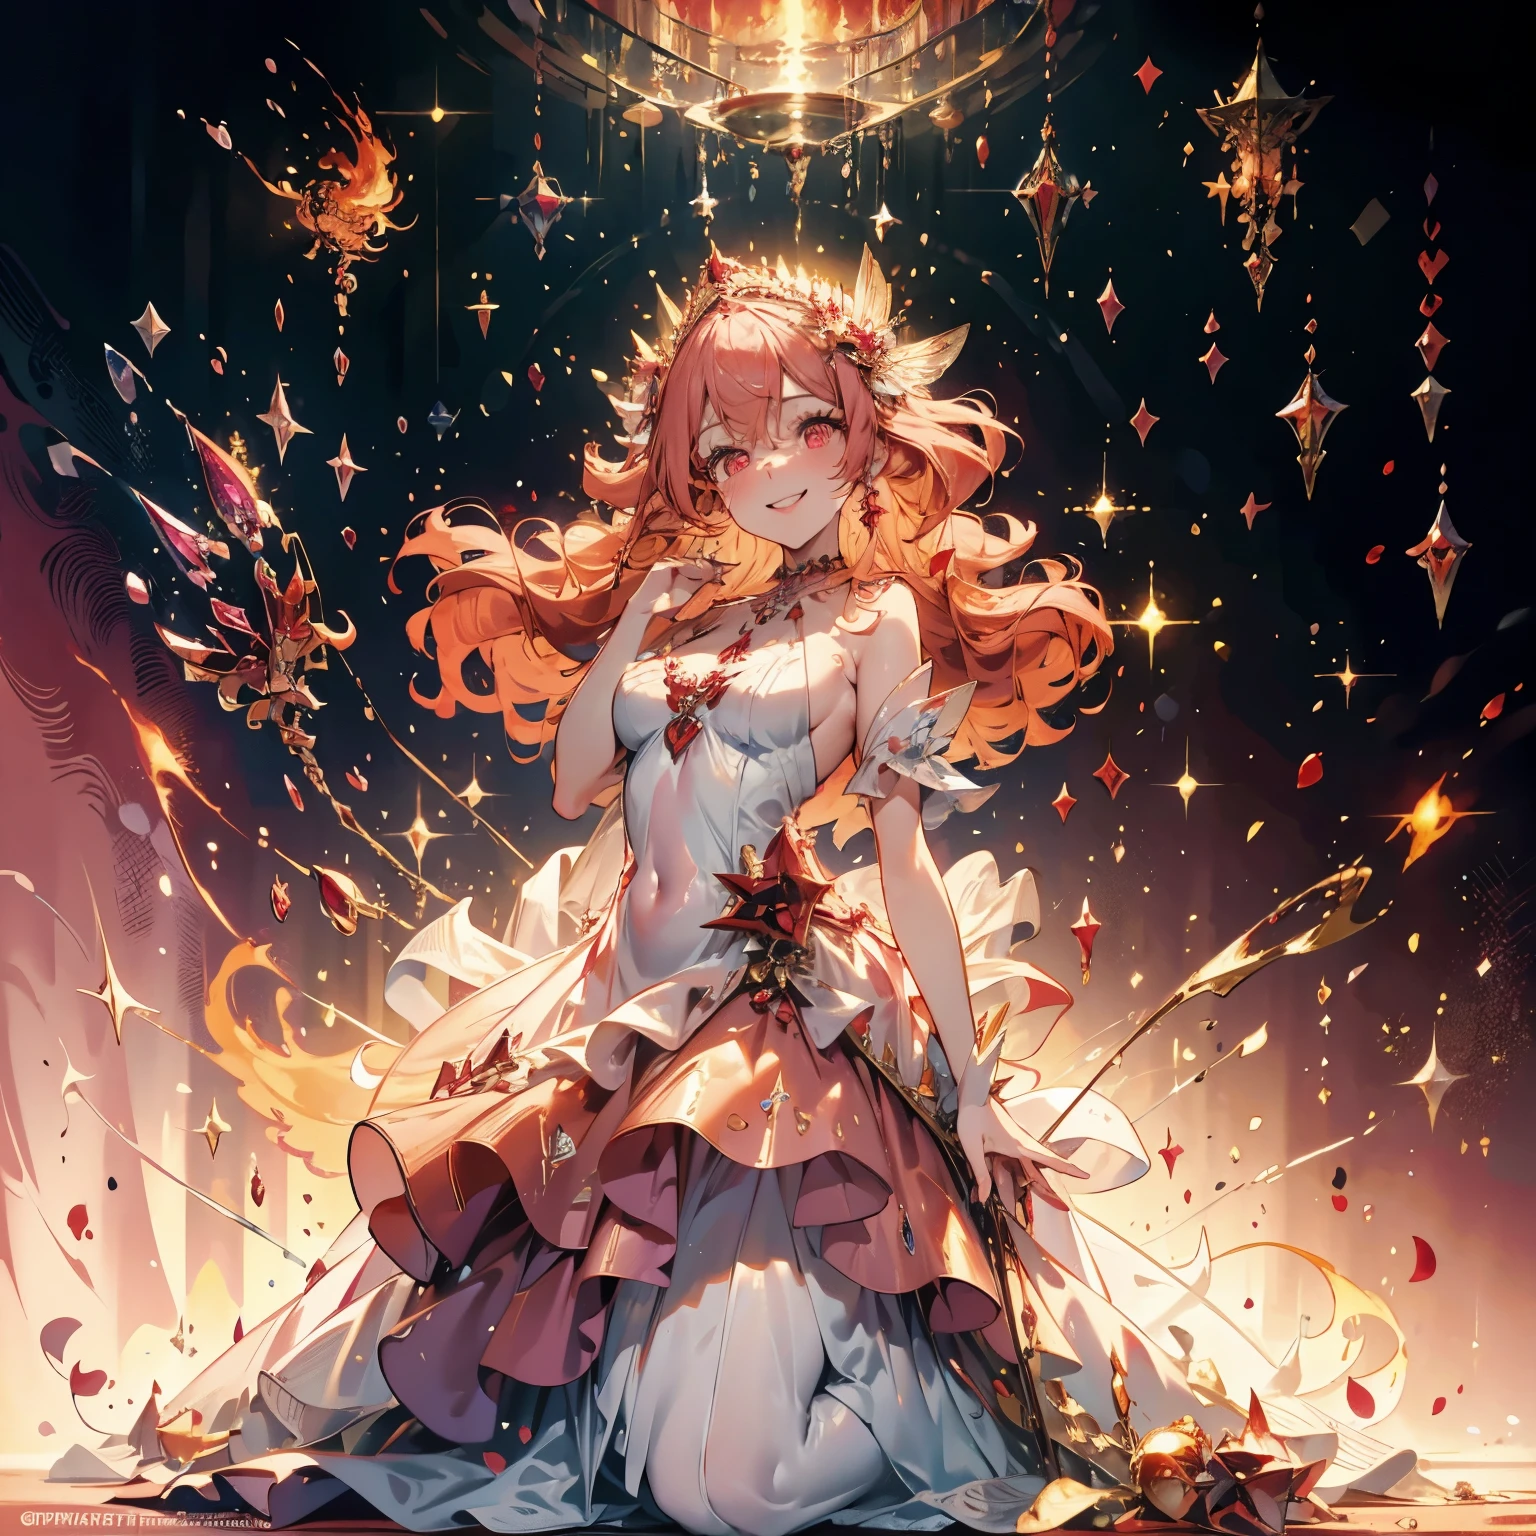  (masterpiece, very detailed, exquisite, beautiful, Full HD, High resolution, confused), (1 person),fairy woman, fire dress base,((fire motif dress)), Giant fairy wings,((smile,Excited, grin and laugh)), dynamic angle,floating, With her left hand on her hip, right hand holding fire,looking at the viewer, golden eyes, Big eyes, tanned skin, slim, ruby earrings, ruby choker, (white and red ball gown dress:1.1, fire motif dress,ruby decoration), (bob, wavy pink hair,My hair is on fire:1.2 ),fantasy, romantic academia,  cinematic lighting, volume lighting, dynamic lighting,soft edge, soft lines,dynamic angle, dramatic lighting, warm lighting, soft lighting, written boundary depth, fantasy, beautiful, dreamy atmosphere, 